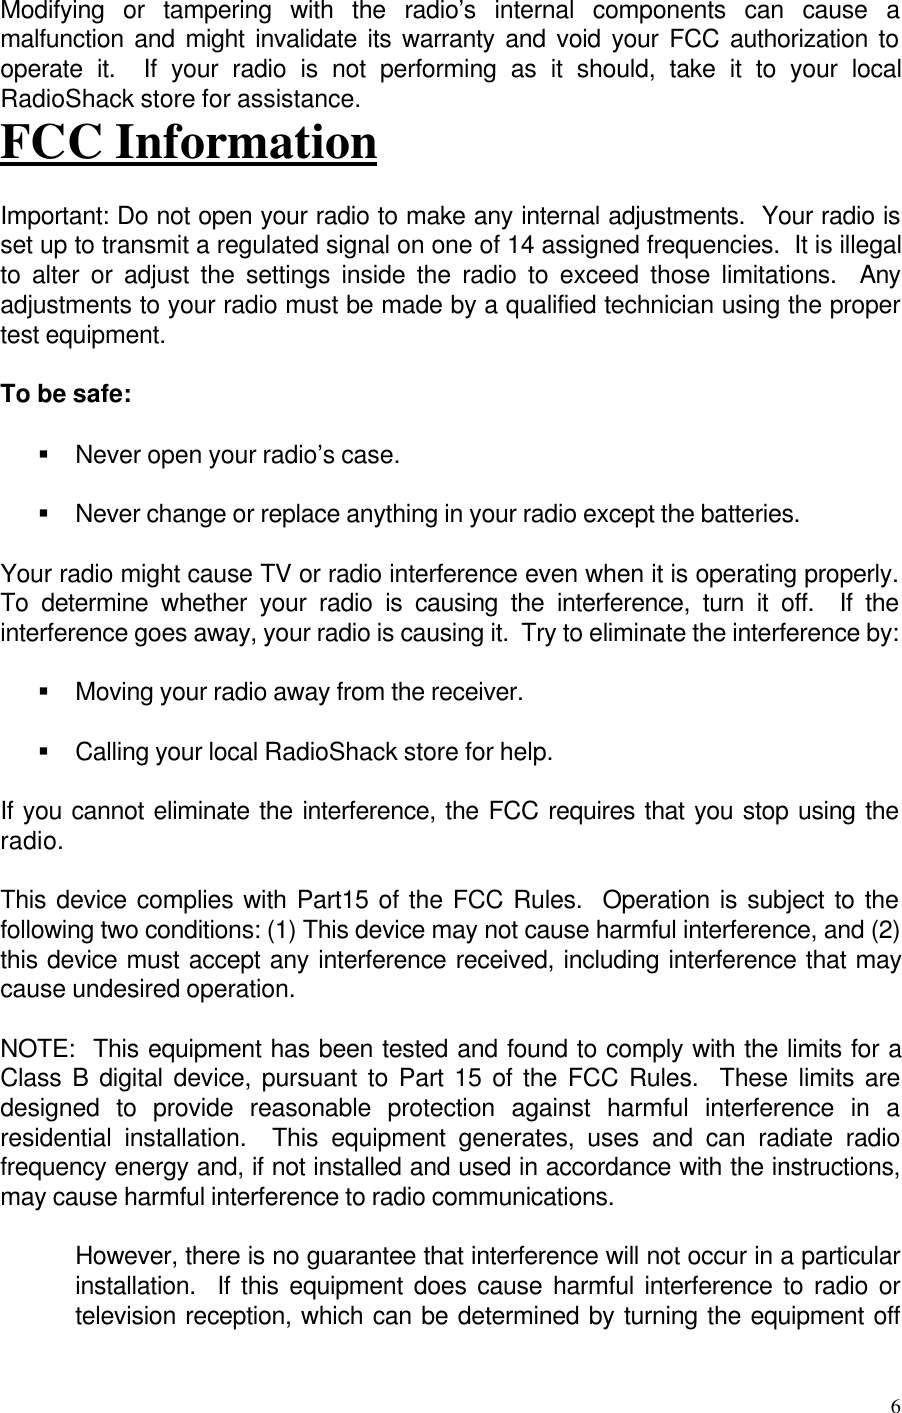 6Modifying or tampering with the radio’s internal components can cause amalfunction and might invalidate its warranty and void your FCC authorization tooperate it.  If your radio is not performing as it should, take it to your localRadioShack store for assistance.FCC InformationImportant: Do not open your radio to make any internal adjustments.  Your radio isset up to transmit a regulated signal on one of 14 assigned frequencies.  It is illegalto alter or adjust the settings inside the radio to exceed those limitations.  Anyadjustments to your radio must be made by a qualified technician using the propertest equipment.To be safe:§ Never open your radio’s case.§ Never change or replace anything in your radio except the batteries.Your radio might cause TV or radio interference even when it is operating properly.To determine whether your radio is causing the interference, turn it off.  If theinterference goes away, your radio is causing it.  Try to eliminate the interference by:§ Moving your radio away from the receiver.§ Calling your local RadioShack store for help.If you cannot eliminate the interference, the FCC requires that you stop using theradio.This device complies with Part15 of the FCC Rules.  Operation is subject to thefollowing two conditions: (1) This device may not cause harmful interference, and (2)this device must accept any interference received, including interference that maycause undesired operation.NOTE:  This equipment has been tested and found to comply with the limits for aClass B digital device, pursuant to Part 15 of the FCC Rules.  These limits aredesigned to provide reasonable protection against harmful interference in aresidential installation.  This equipment generates, uses and can radiate radiofrequency energy and, if not installed and used in accordance with the instructions,may cause harmful interference to radio communications.However, there is no guarantee that interference will not occur in a particularinstallation.  If this equipment does cause harmful interference to radio ortelevision reception, which can be determined by turning the equipment off